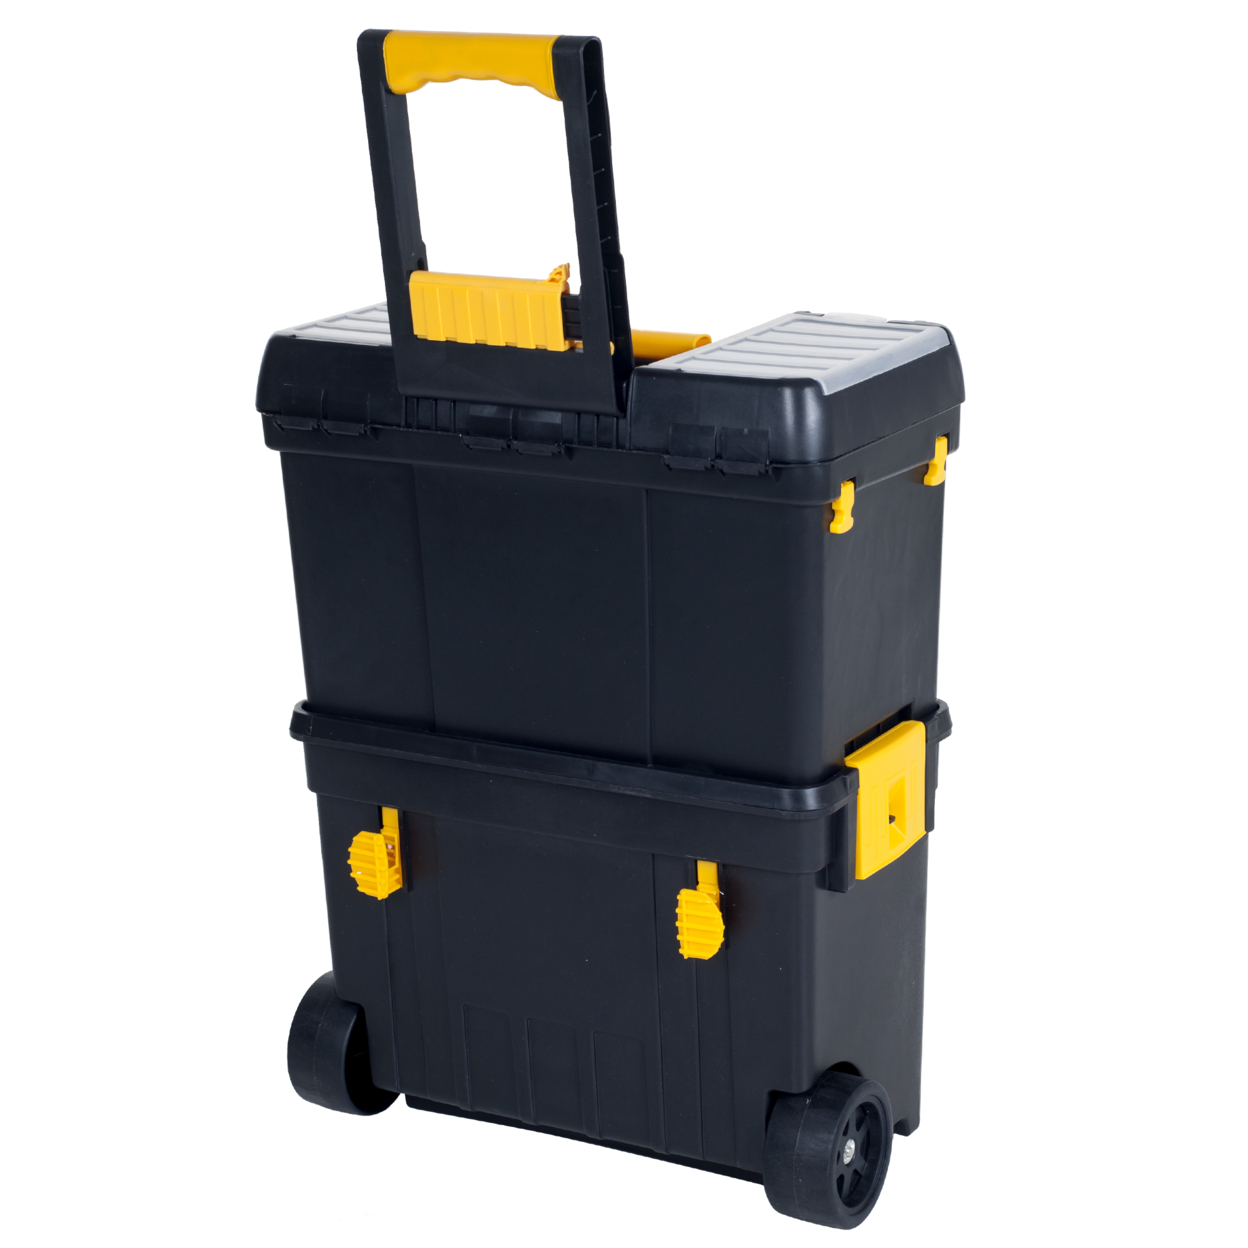 Stalwart Mobile Workshop and Toolbox 24 Inch High Portable Tool Storage on Wheels